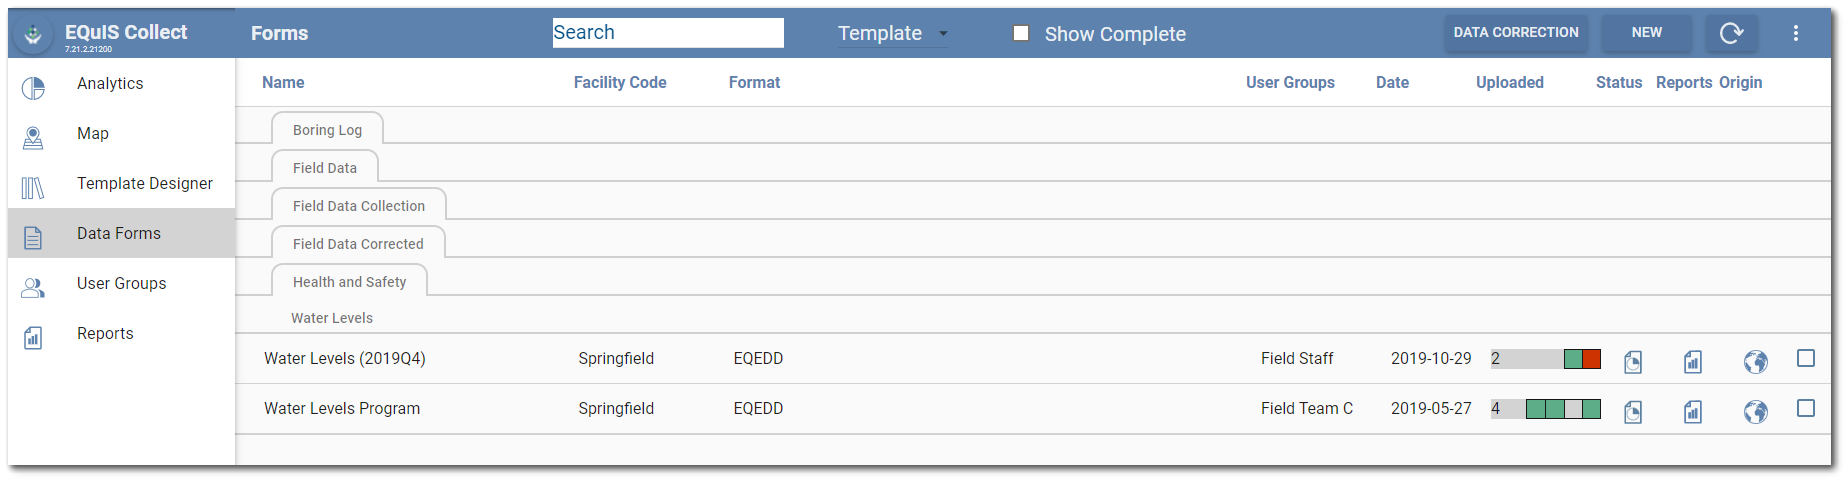 col-forms_page-groupby_type-wl_zoom45